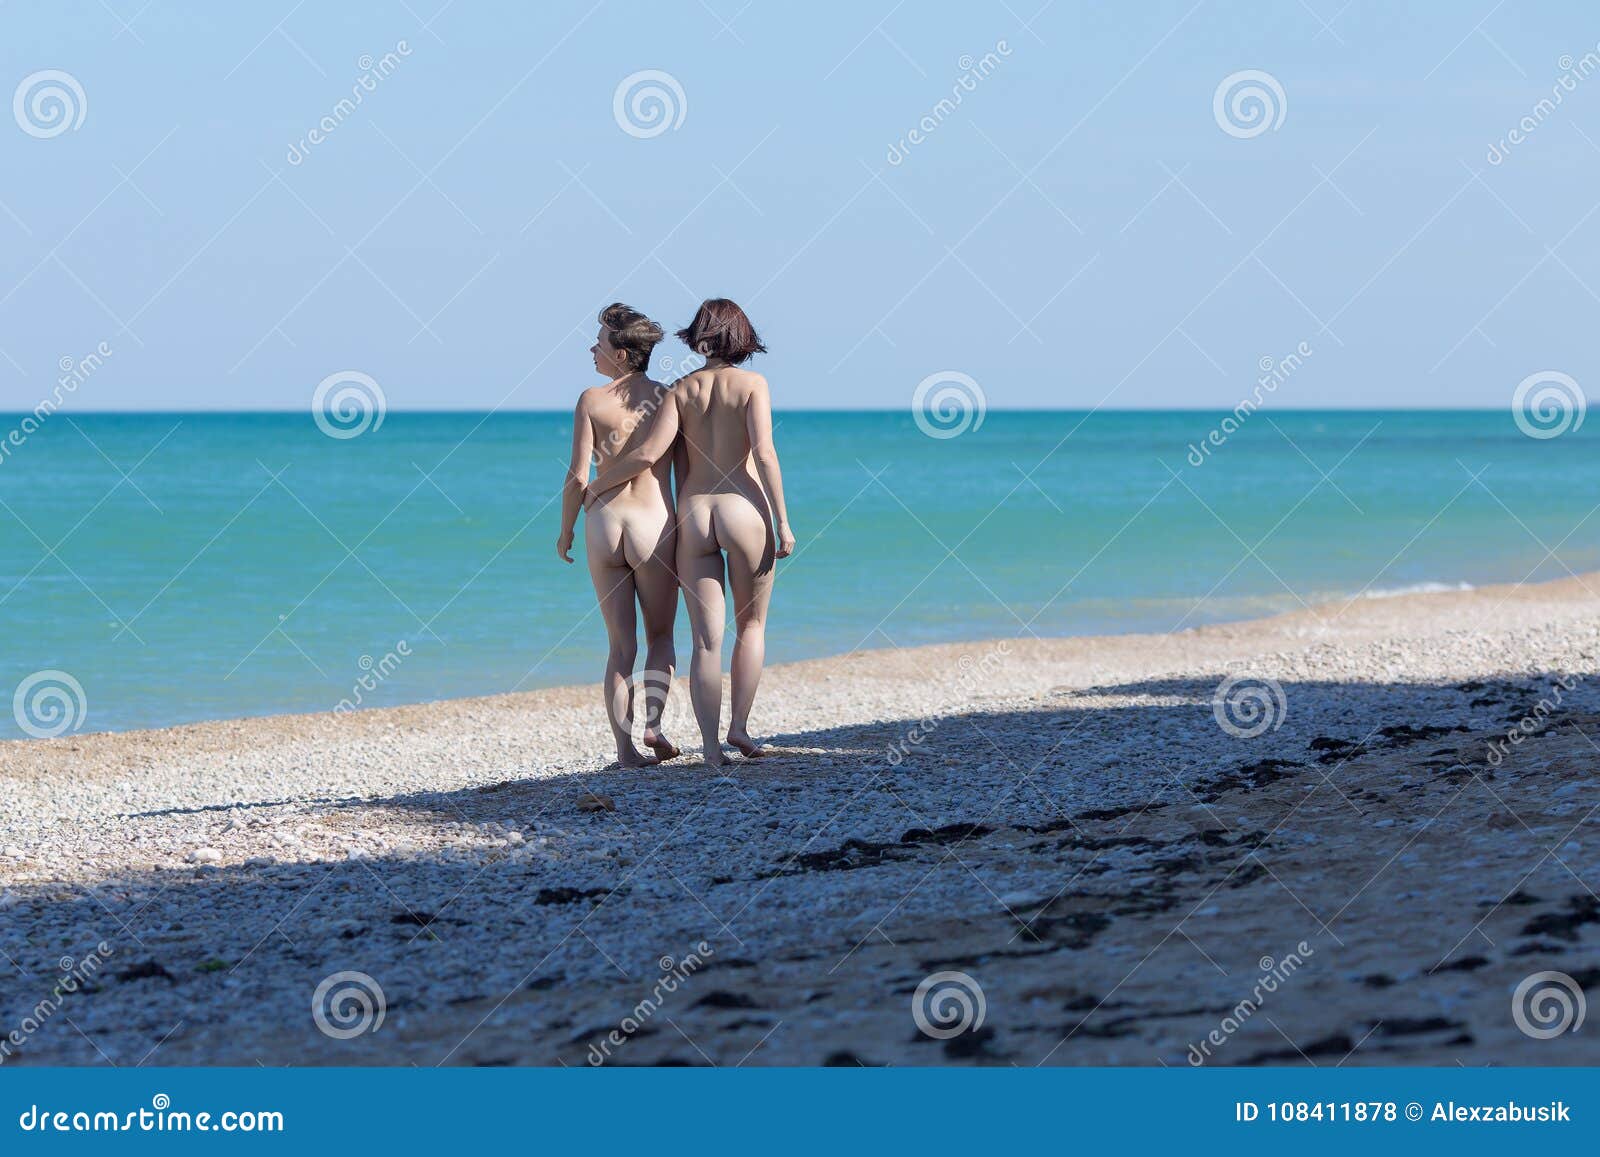 Two Nude Female Persons Going Along Seashore in Morning Time Stock Photo photo